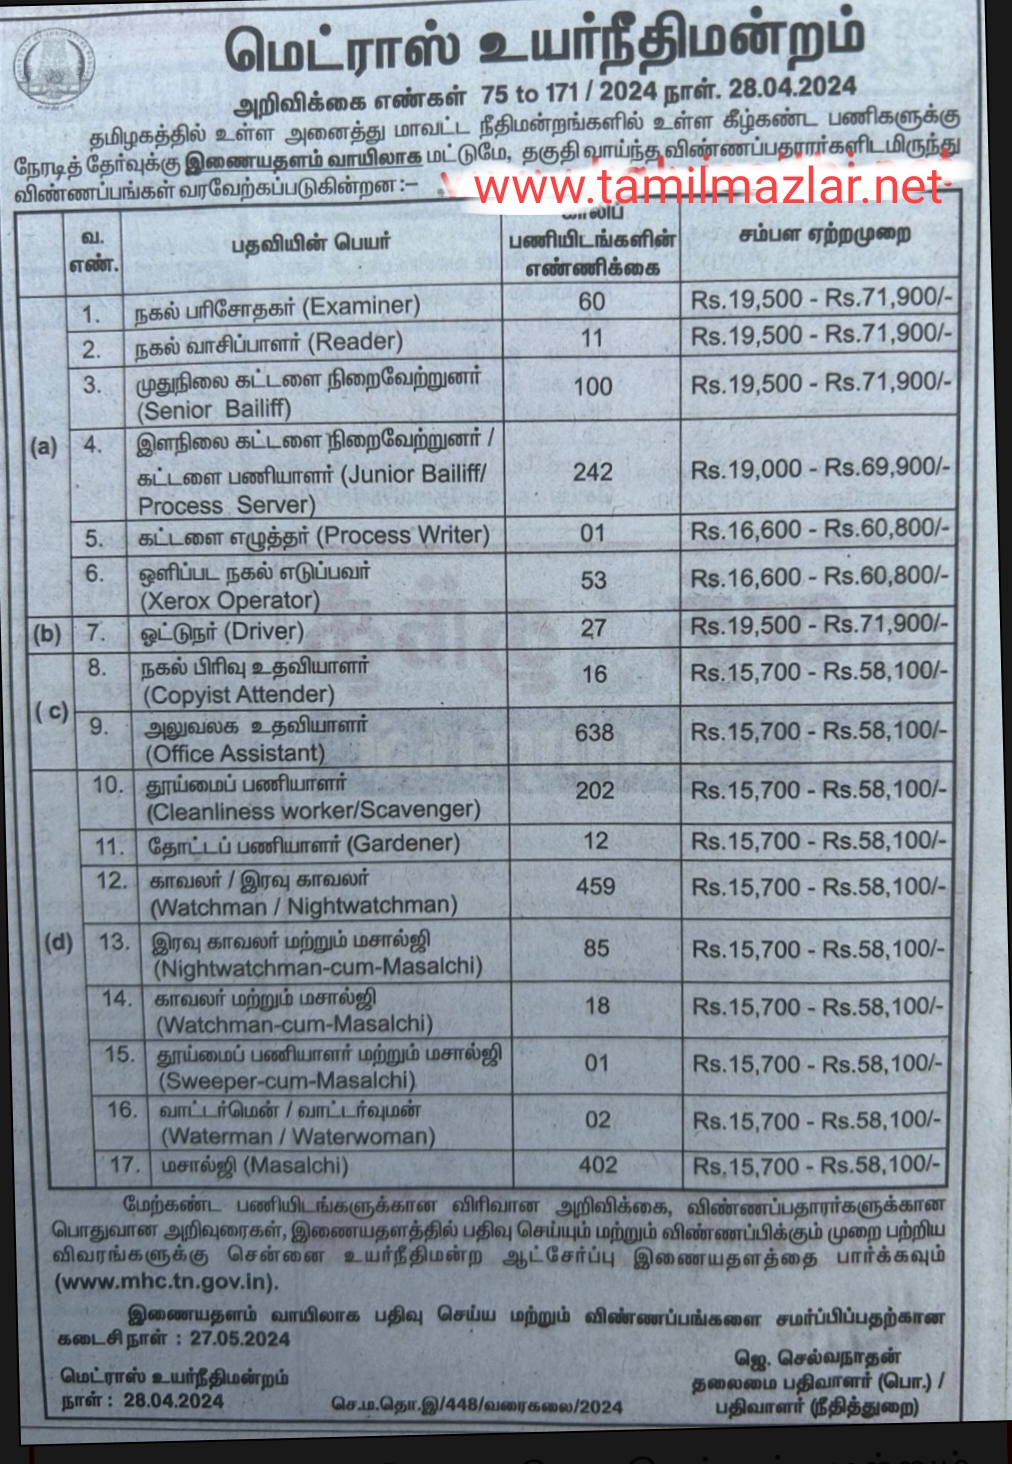 Madras High Court Notification for filling up 2320 Vacancies